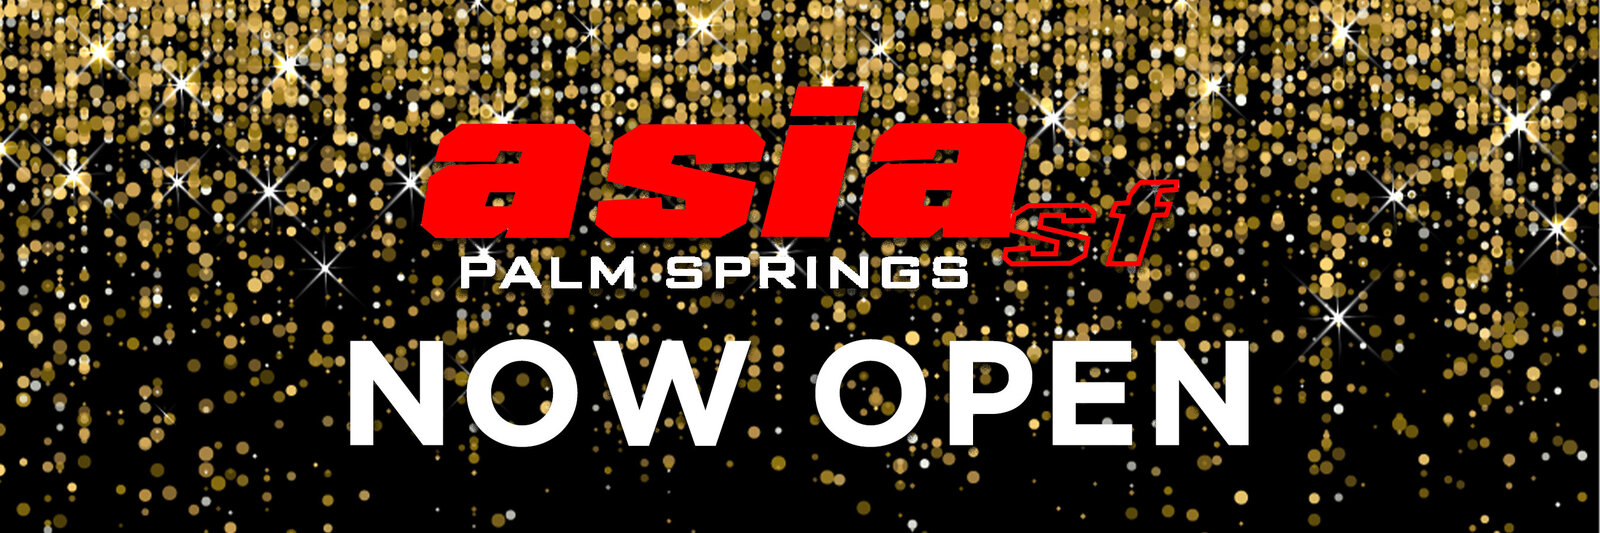 1.6 AsiaSF PS reopening banner